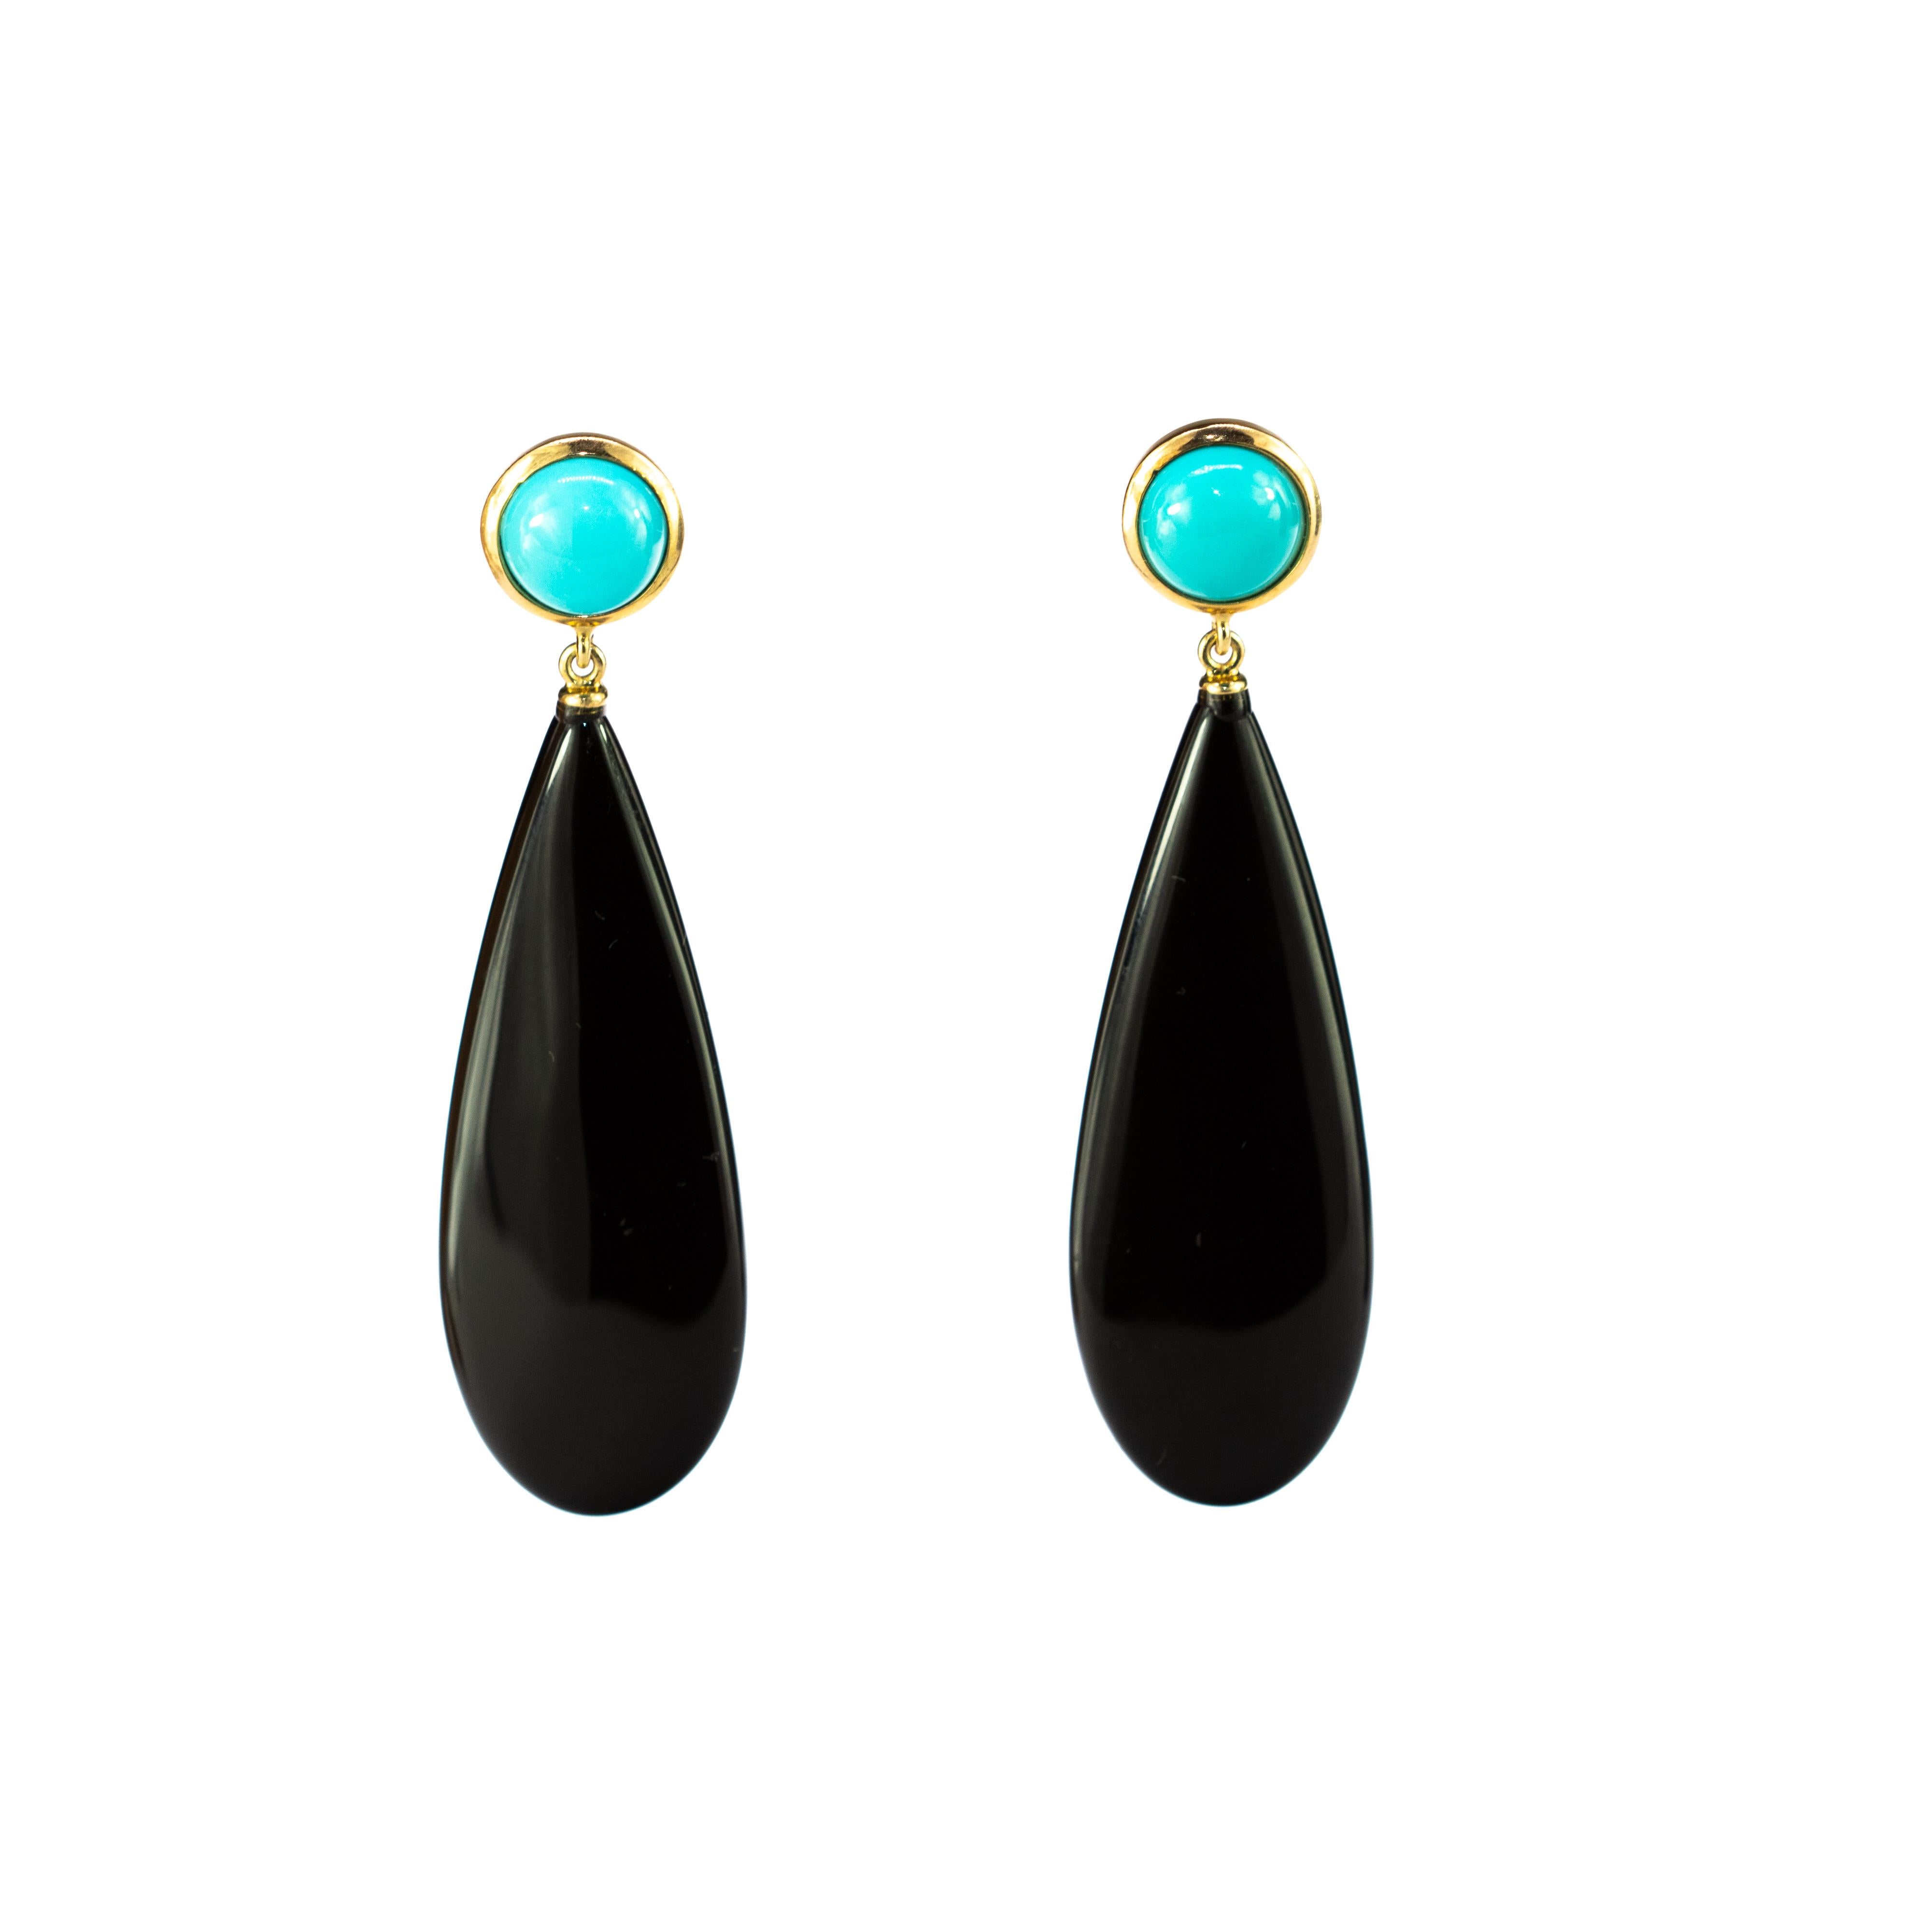 Black agate chandelier drops medium size. With two turquoise gems combining voluminous shapes with vivid colours, resulting in bold, free-spirited pieces with a charming elegance.

The turquoise is one of the most desired jewels since the beginning